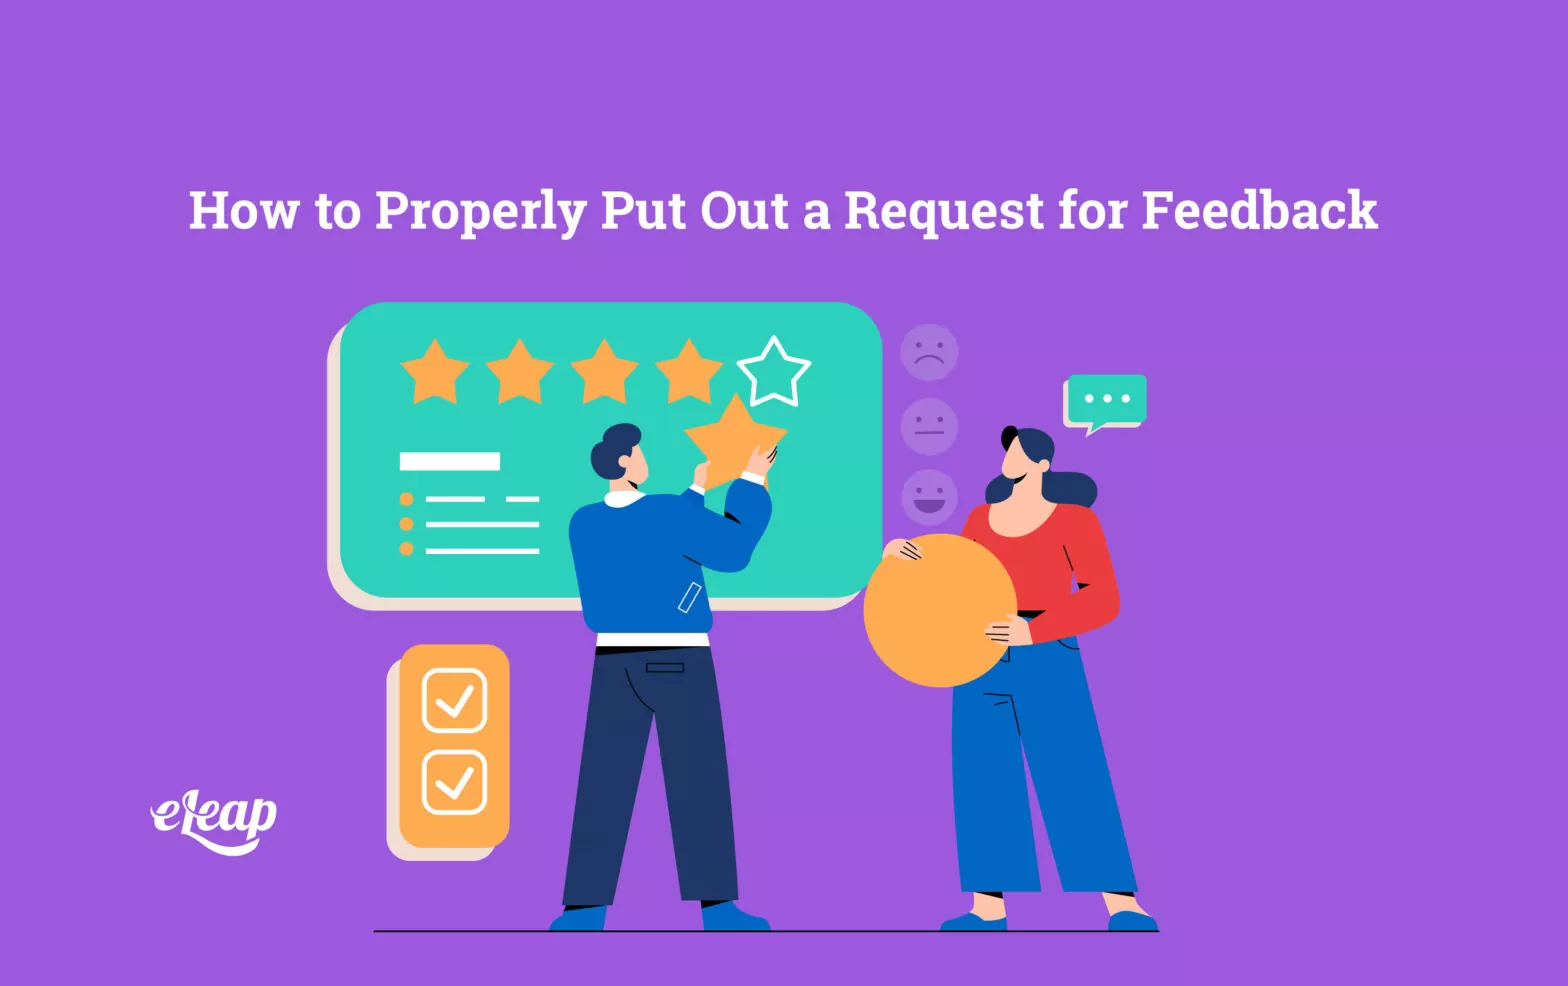 How to Properly Put Out a Request for Feedback